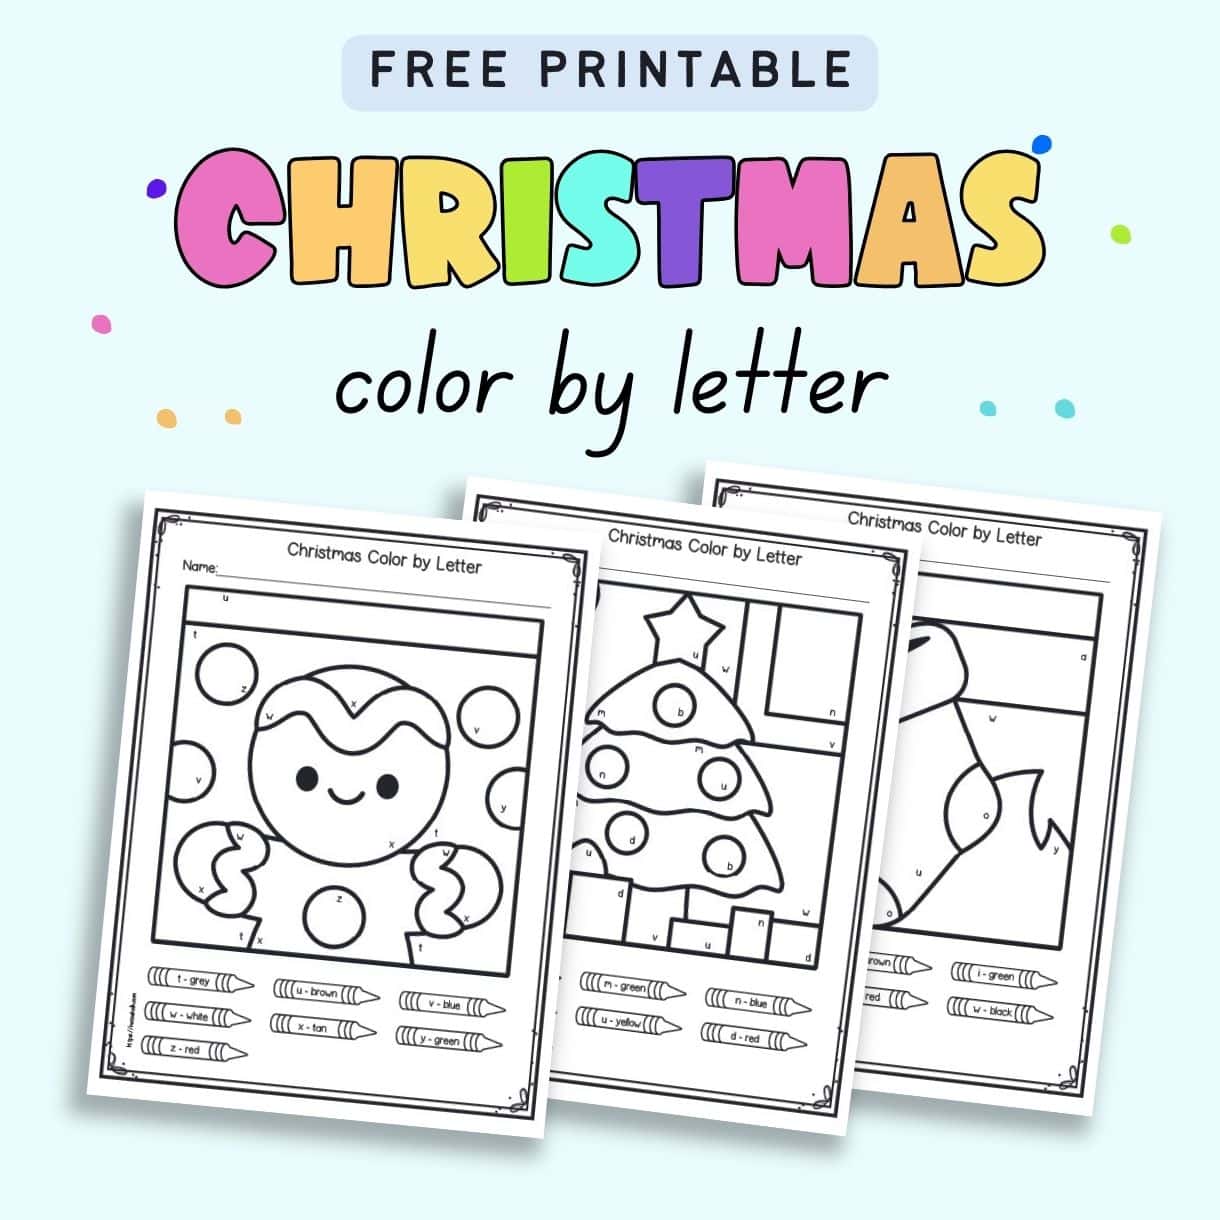 Text "free printable Christmas color by letter" with a preview of three Christmas color by letter worksheets for pre-k and kindergarten students.